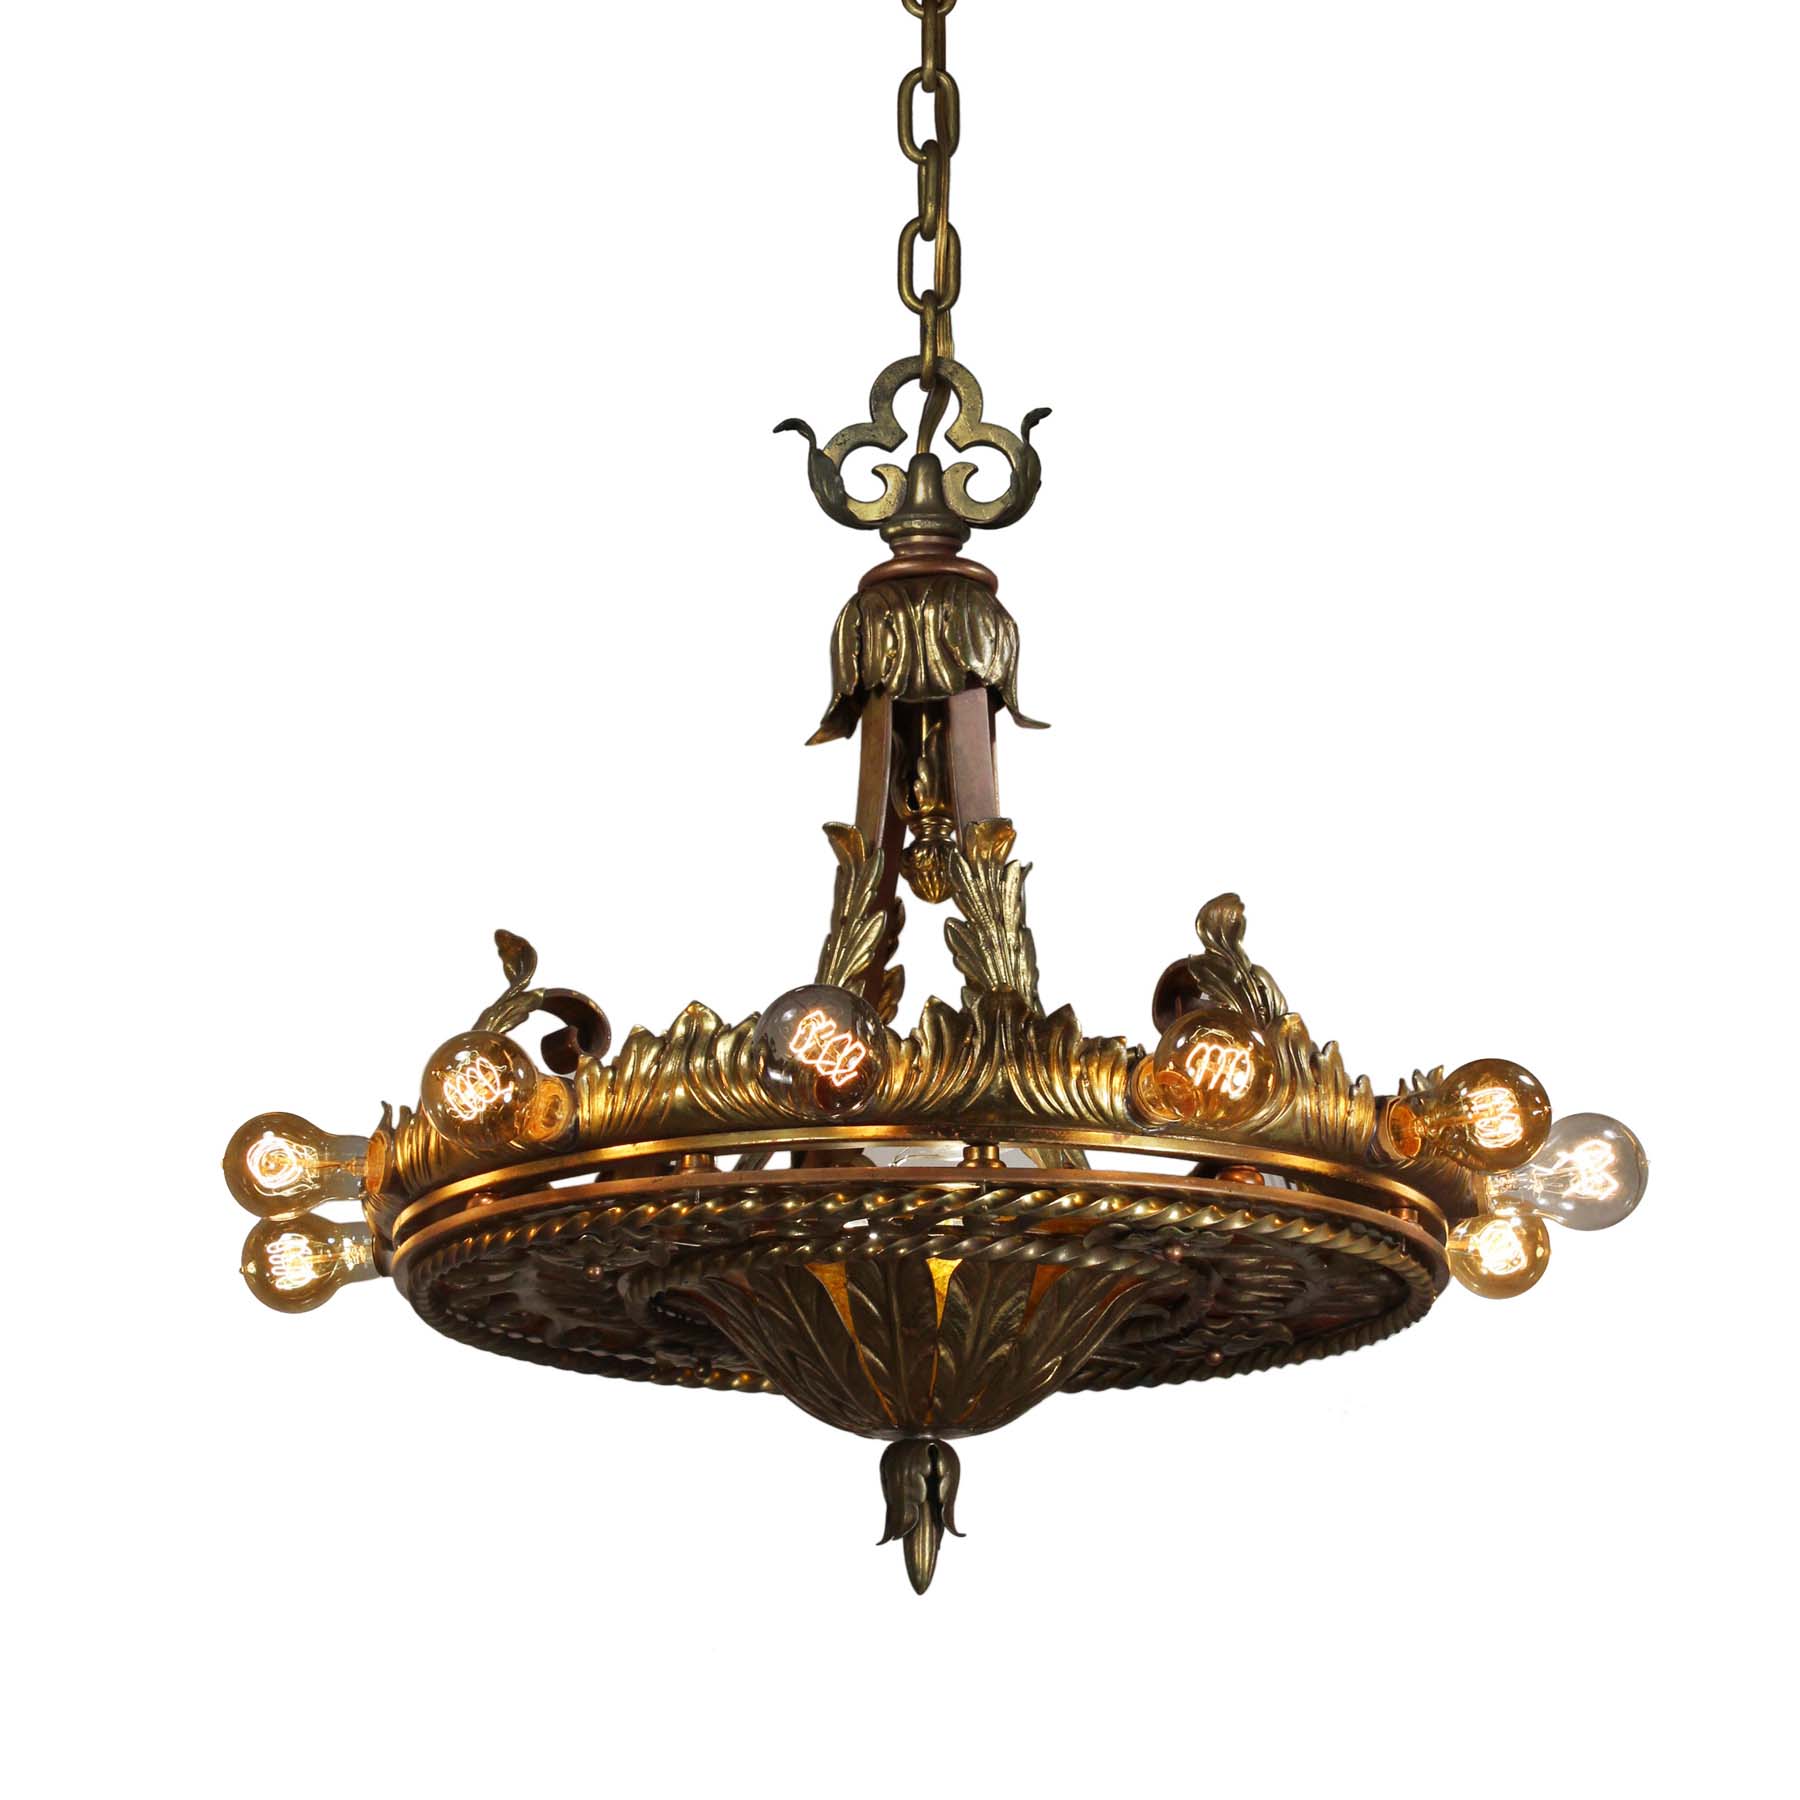 SOLD Substantial Antique Brass Chandelier with Mica -0